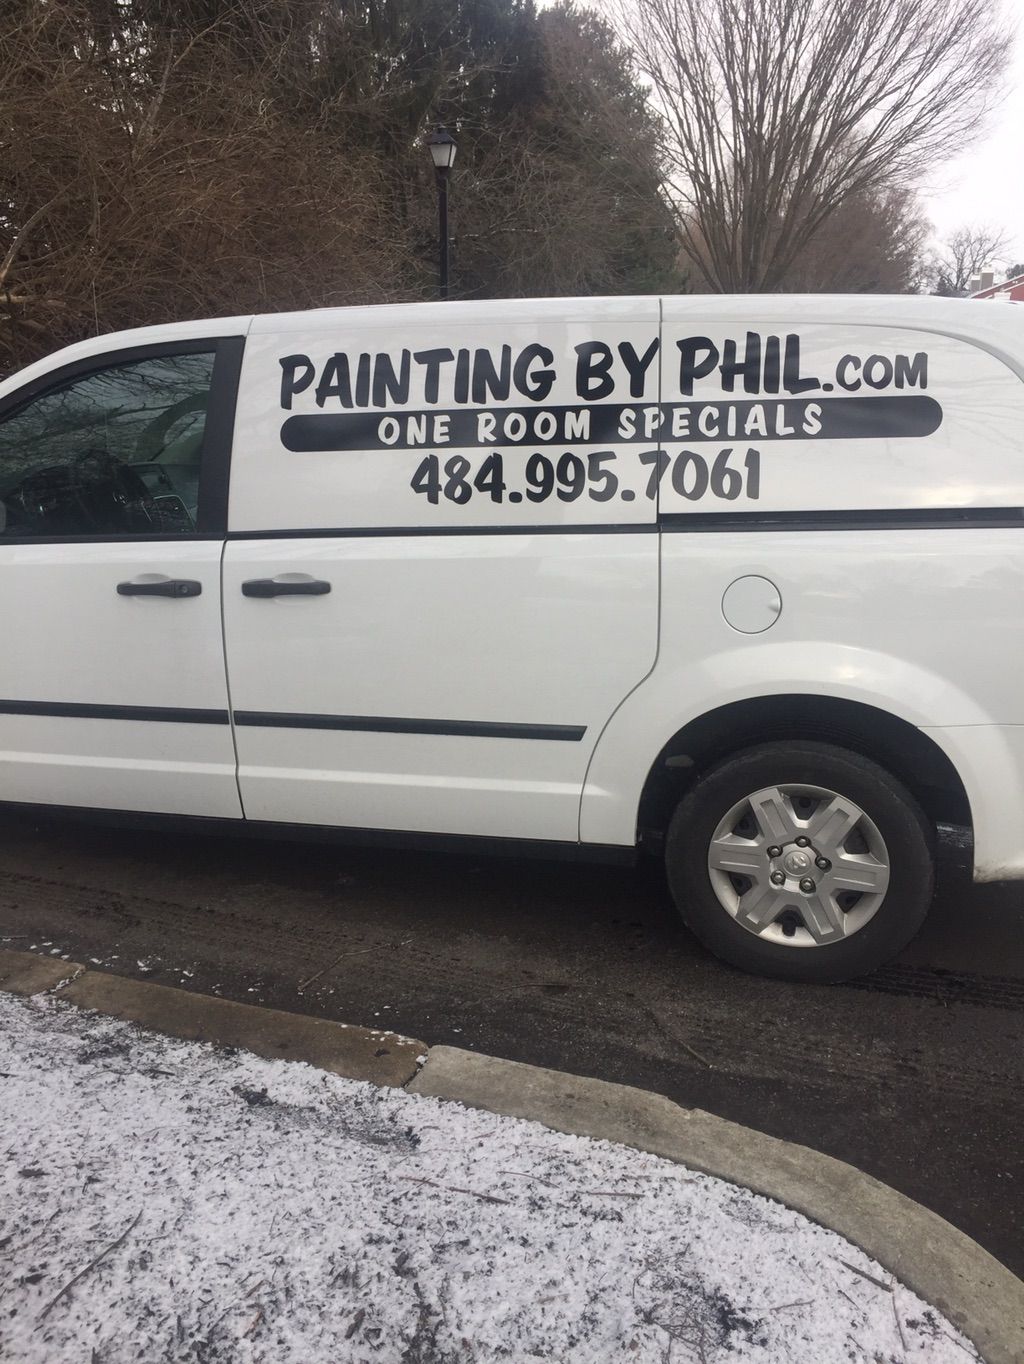 PHIL THE PAINTER